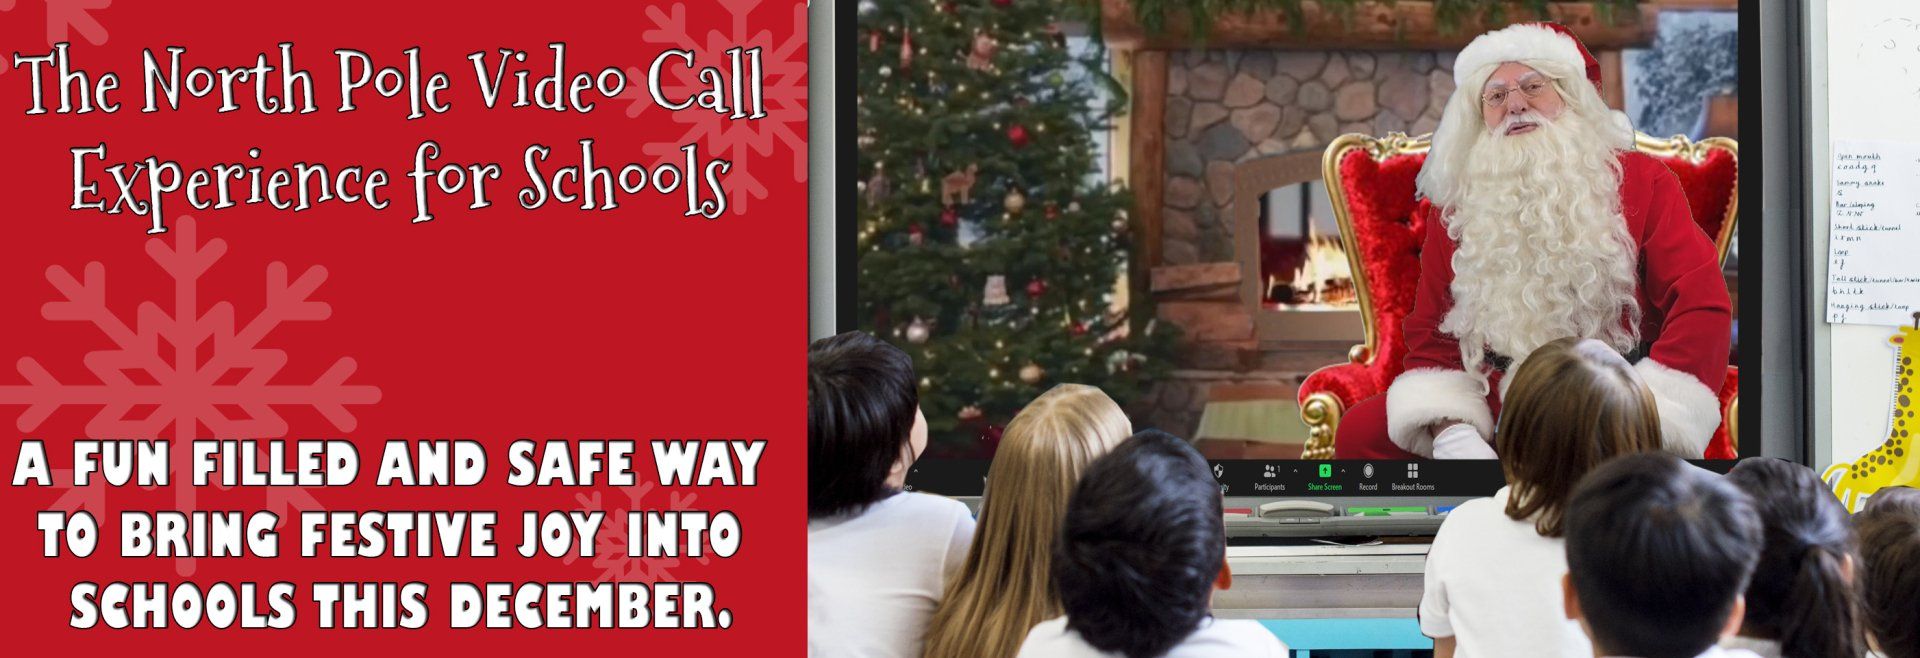 Live Video Call with Santa for Schools